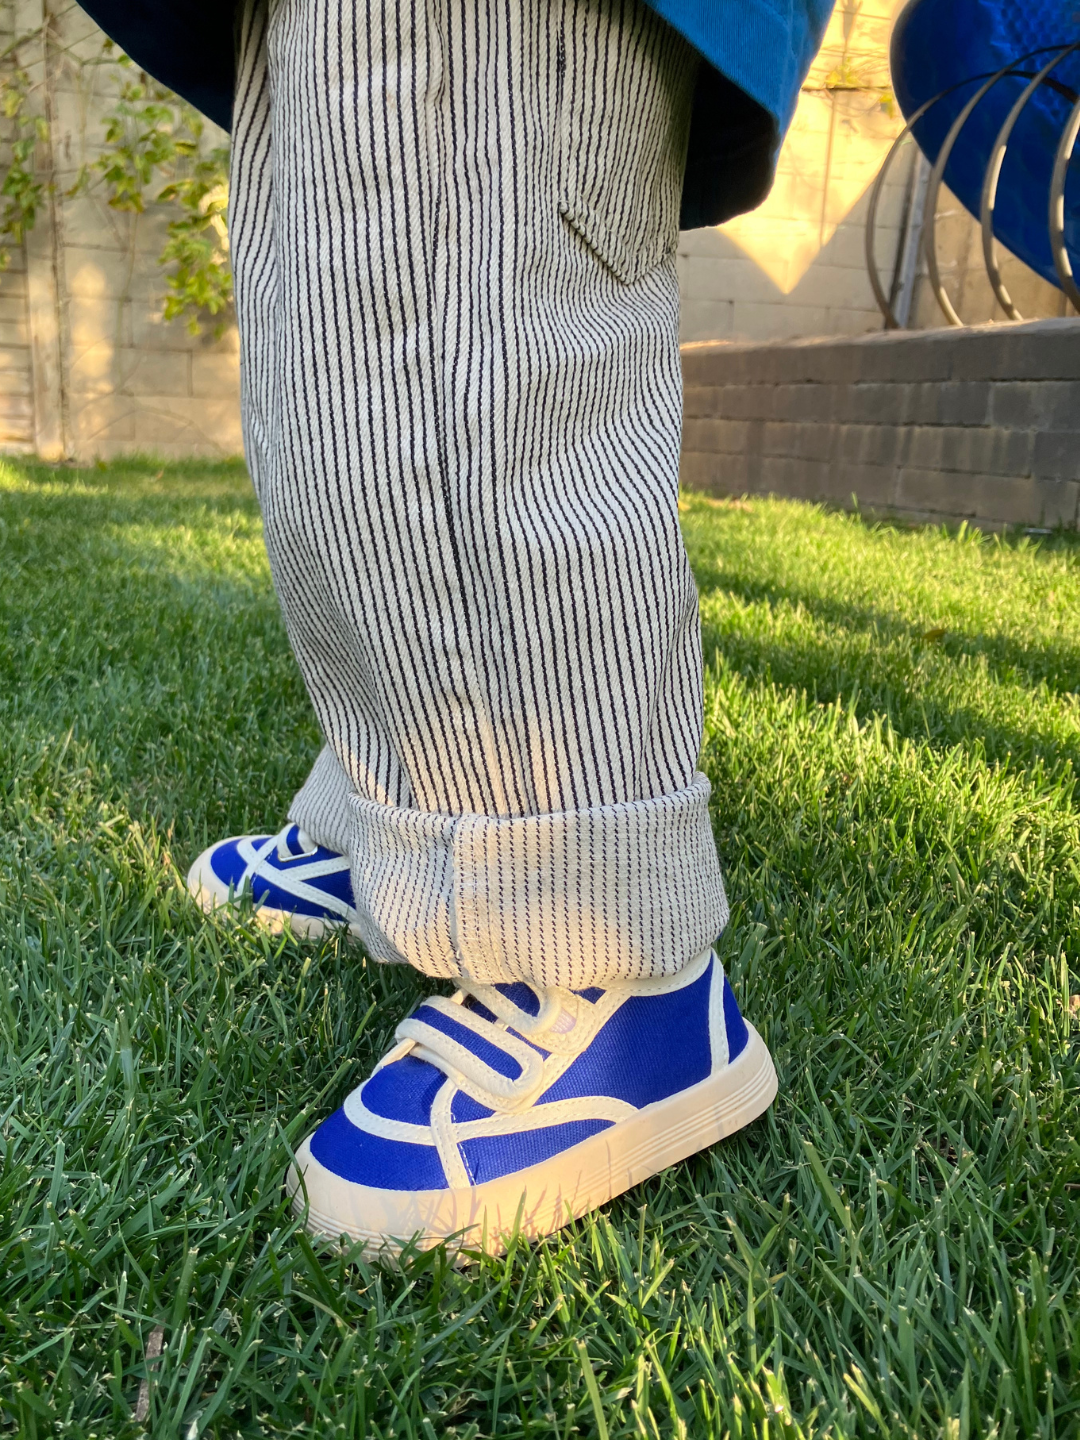 Child standing on grass wearing pair of kids' sneakers in blue with white trim